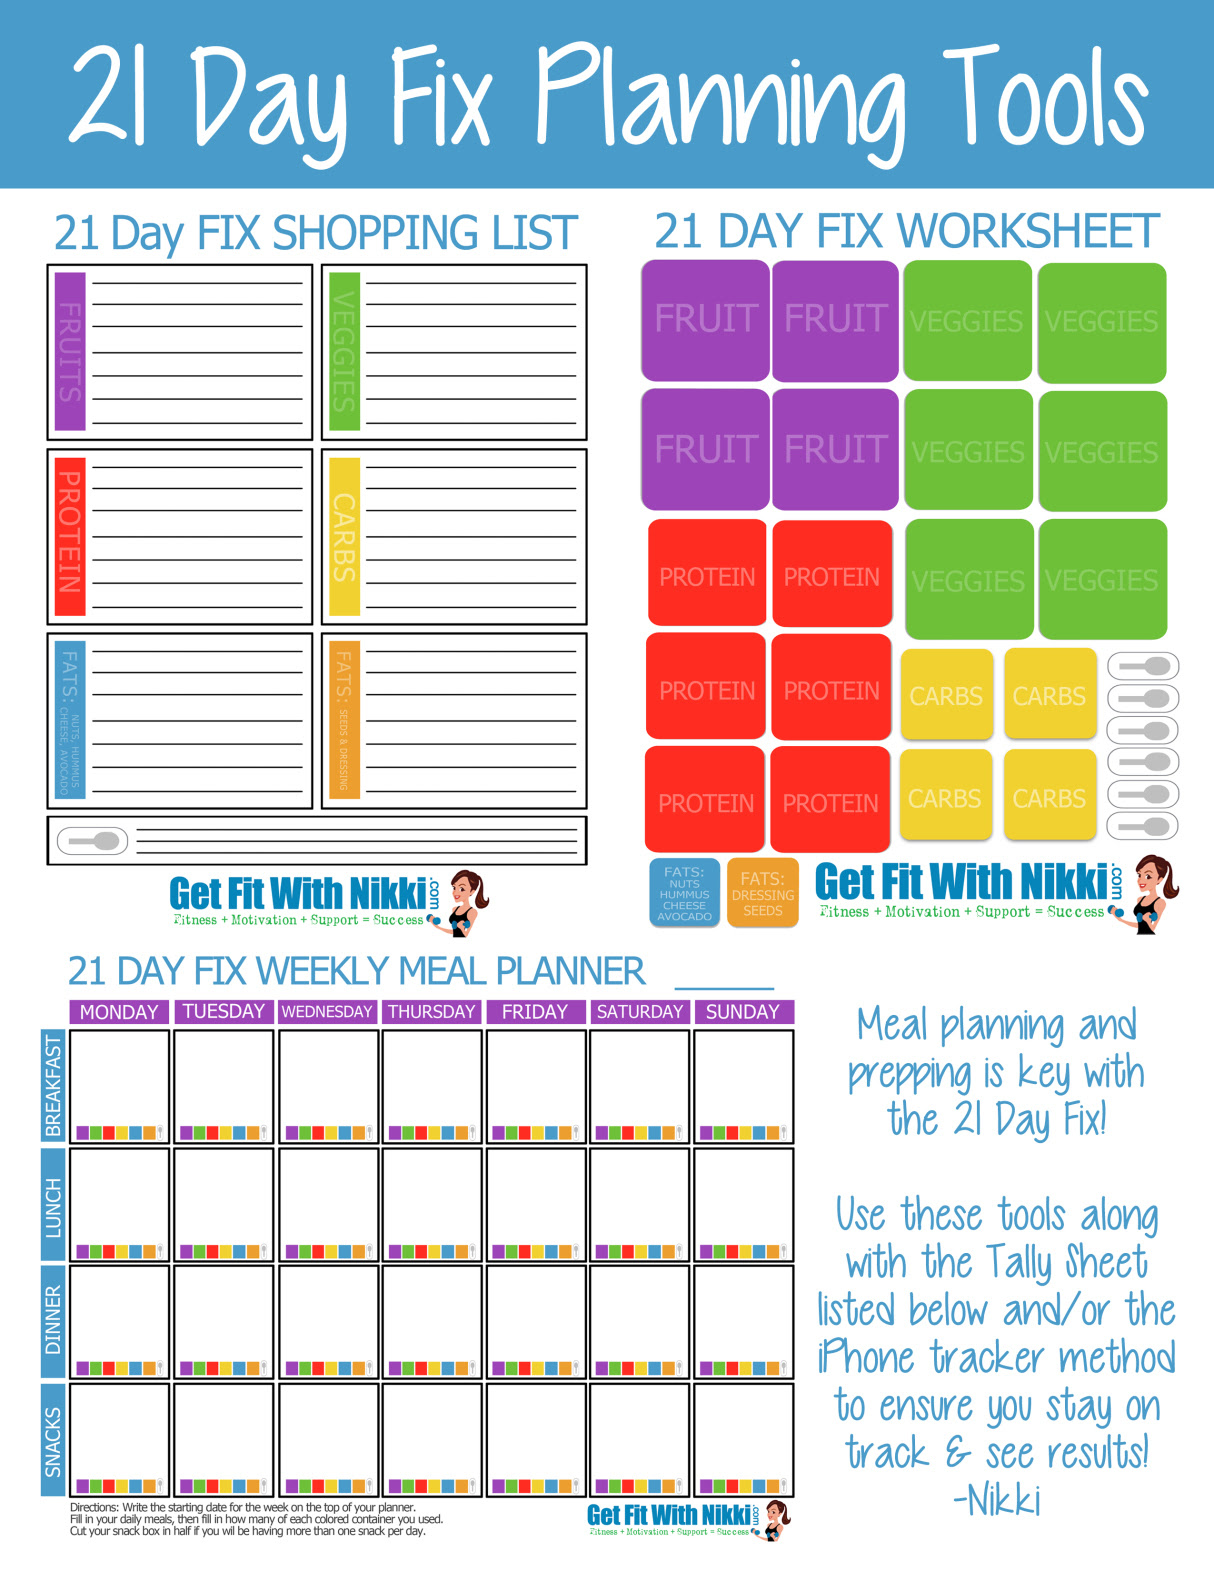 New 21 Day Fix Food List Printable Plus 11 Simple Tips to Meal Prep